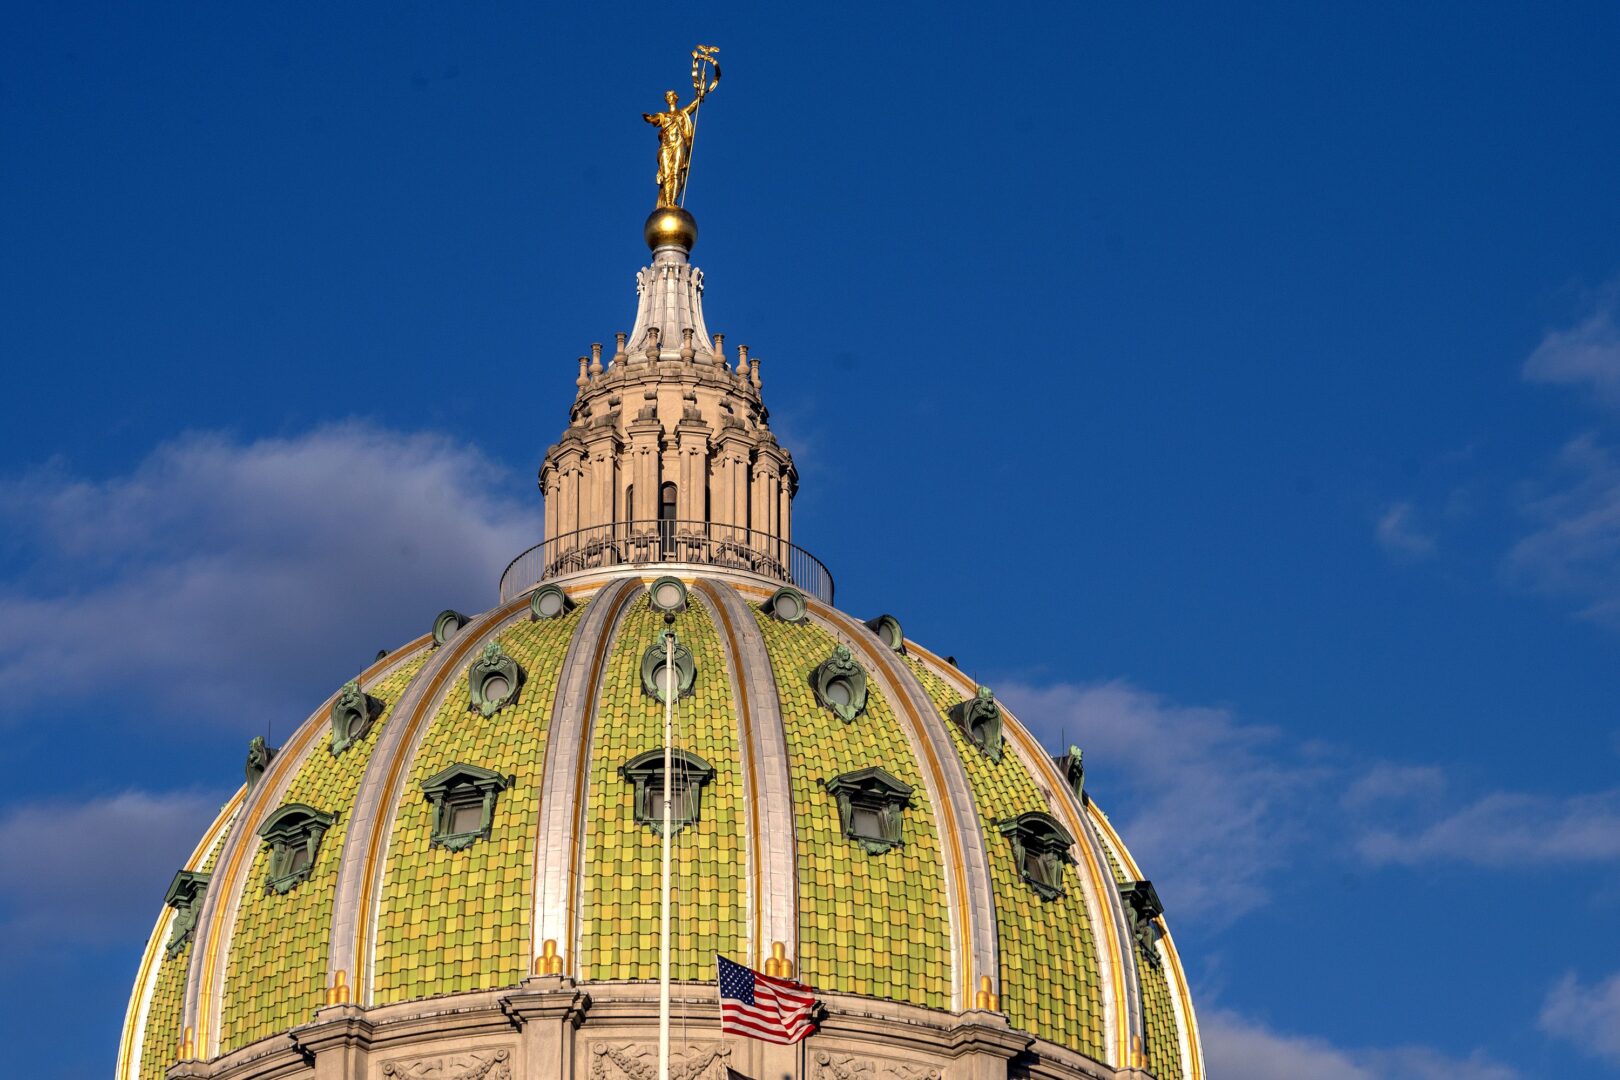 After the state switched to a new filing system, the wait to register a new business reached about six weeks in early December. An attorney with the Department of State acknowledged to Spotlight PA that the processing times were 